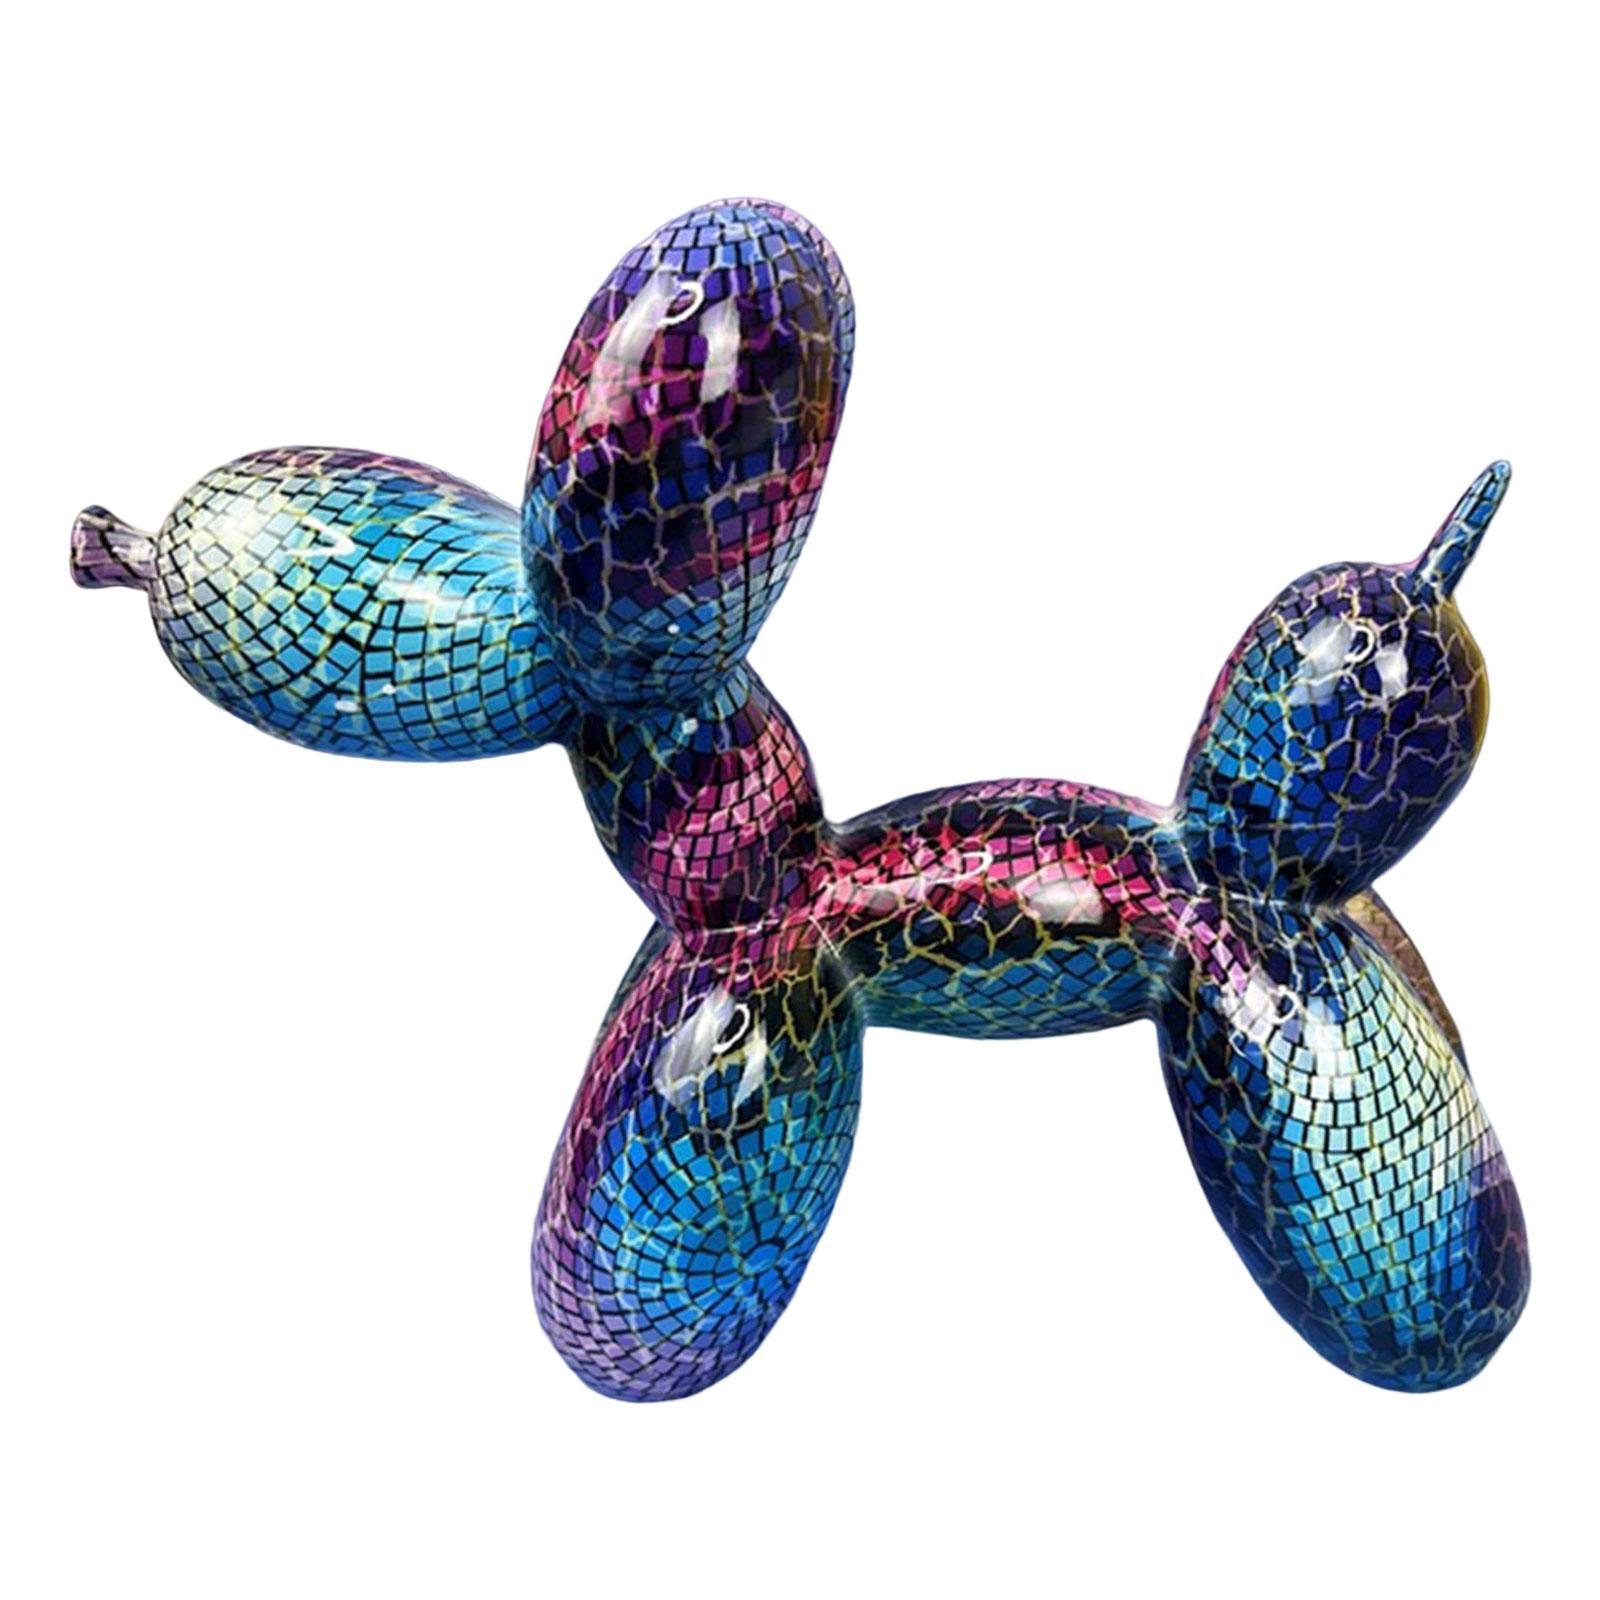 Lovely Balloon Dog Sculptures Animal Figurines for Bedroom Kids Room Home Ornament